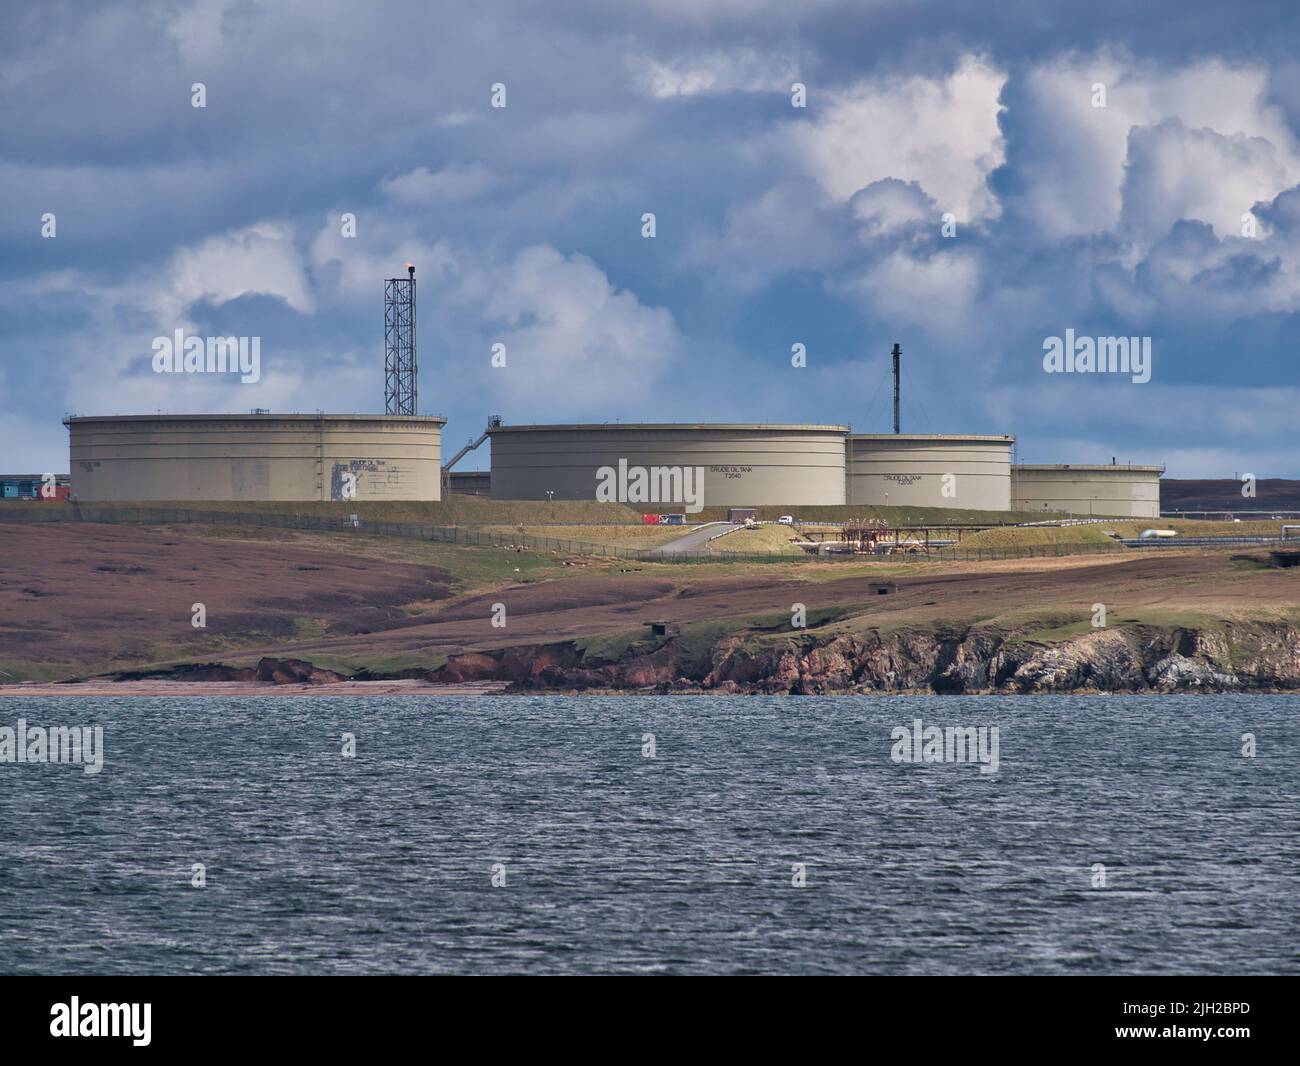 Concrete crude oil storage tanks at Sullom Voe Terminal in Shetland. Taken in sunshine on a cloudy day. Stock Photo